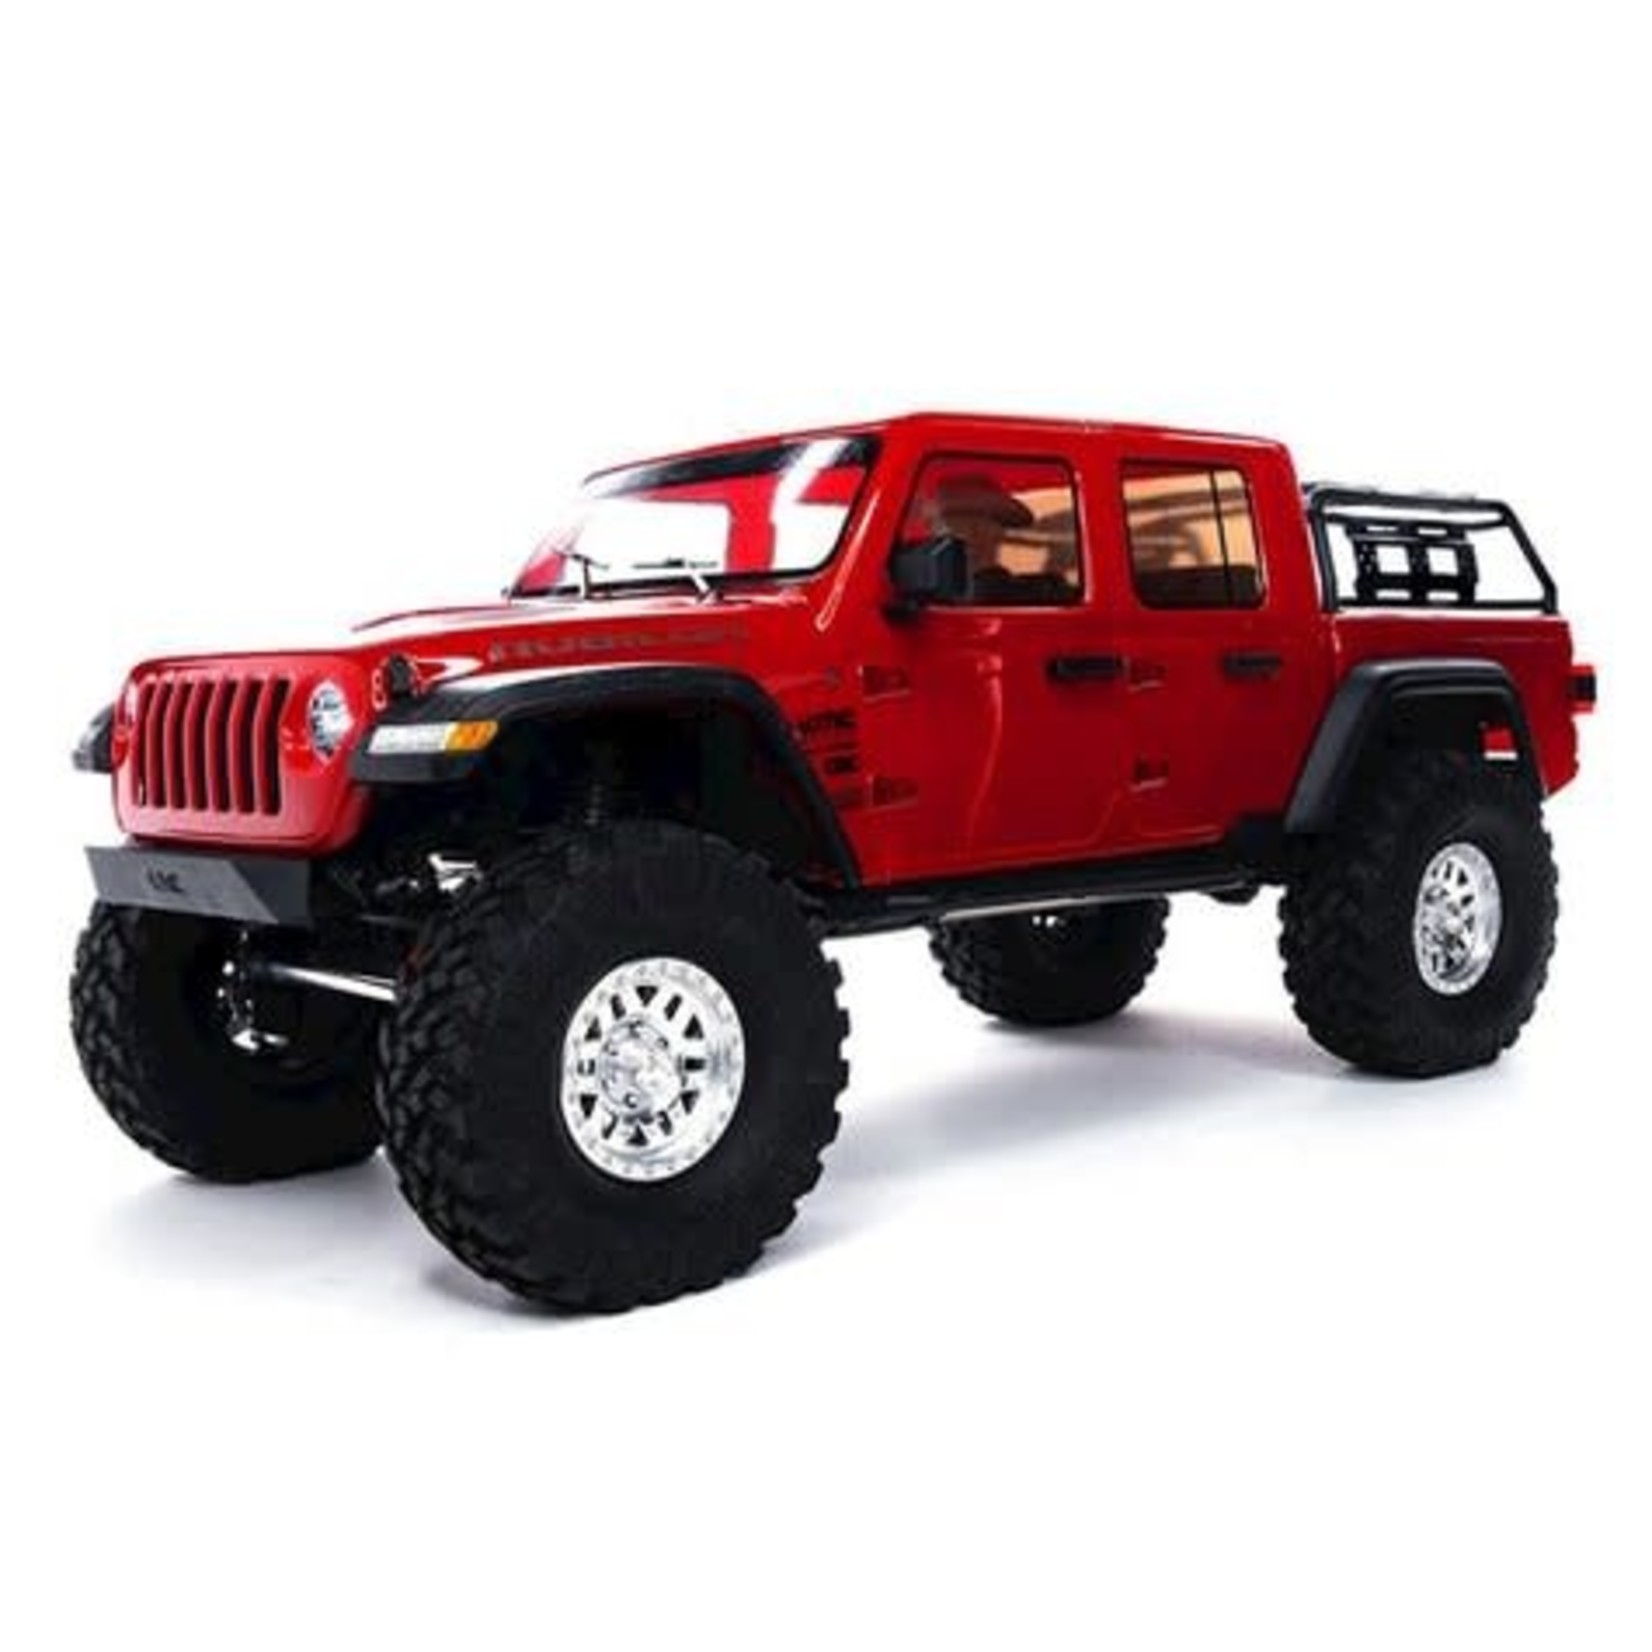 Axial Axial SCX10 III "Jeep JT Gladiator" RTR 4WD Rock Crawler (Red) #AXI03006BT2